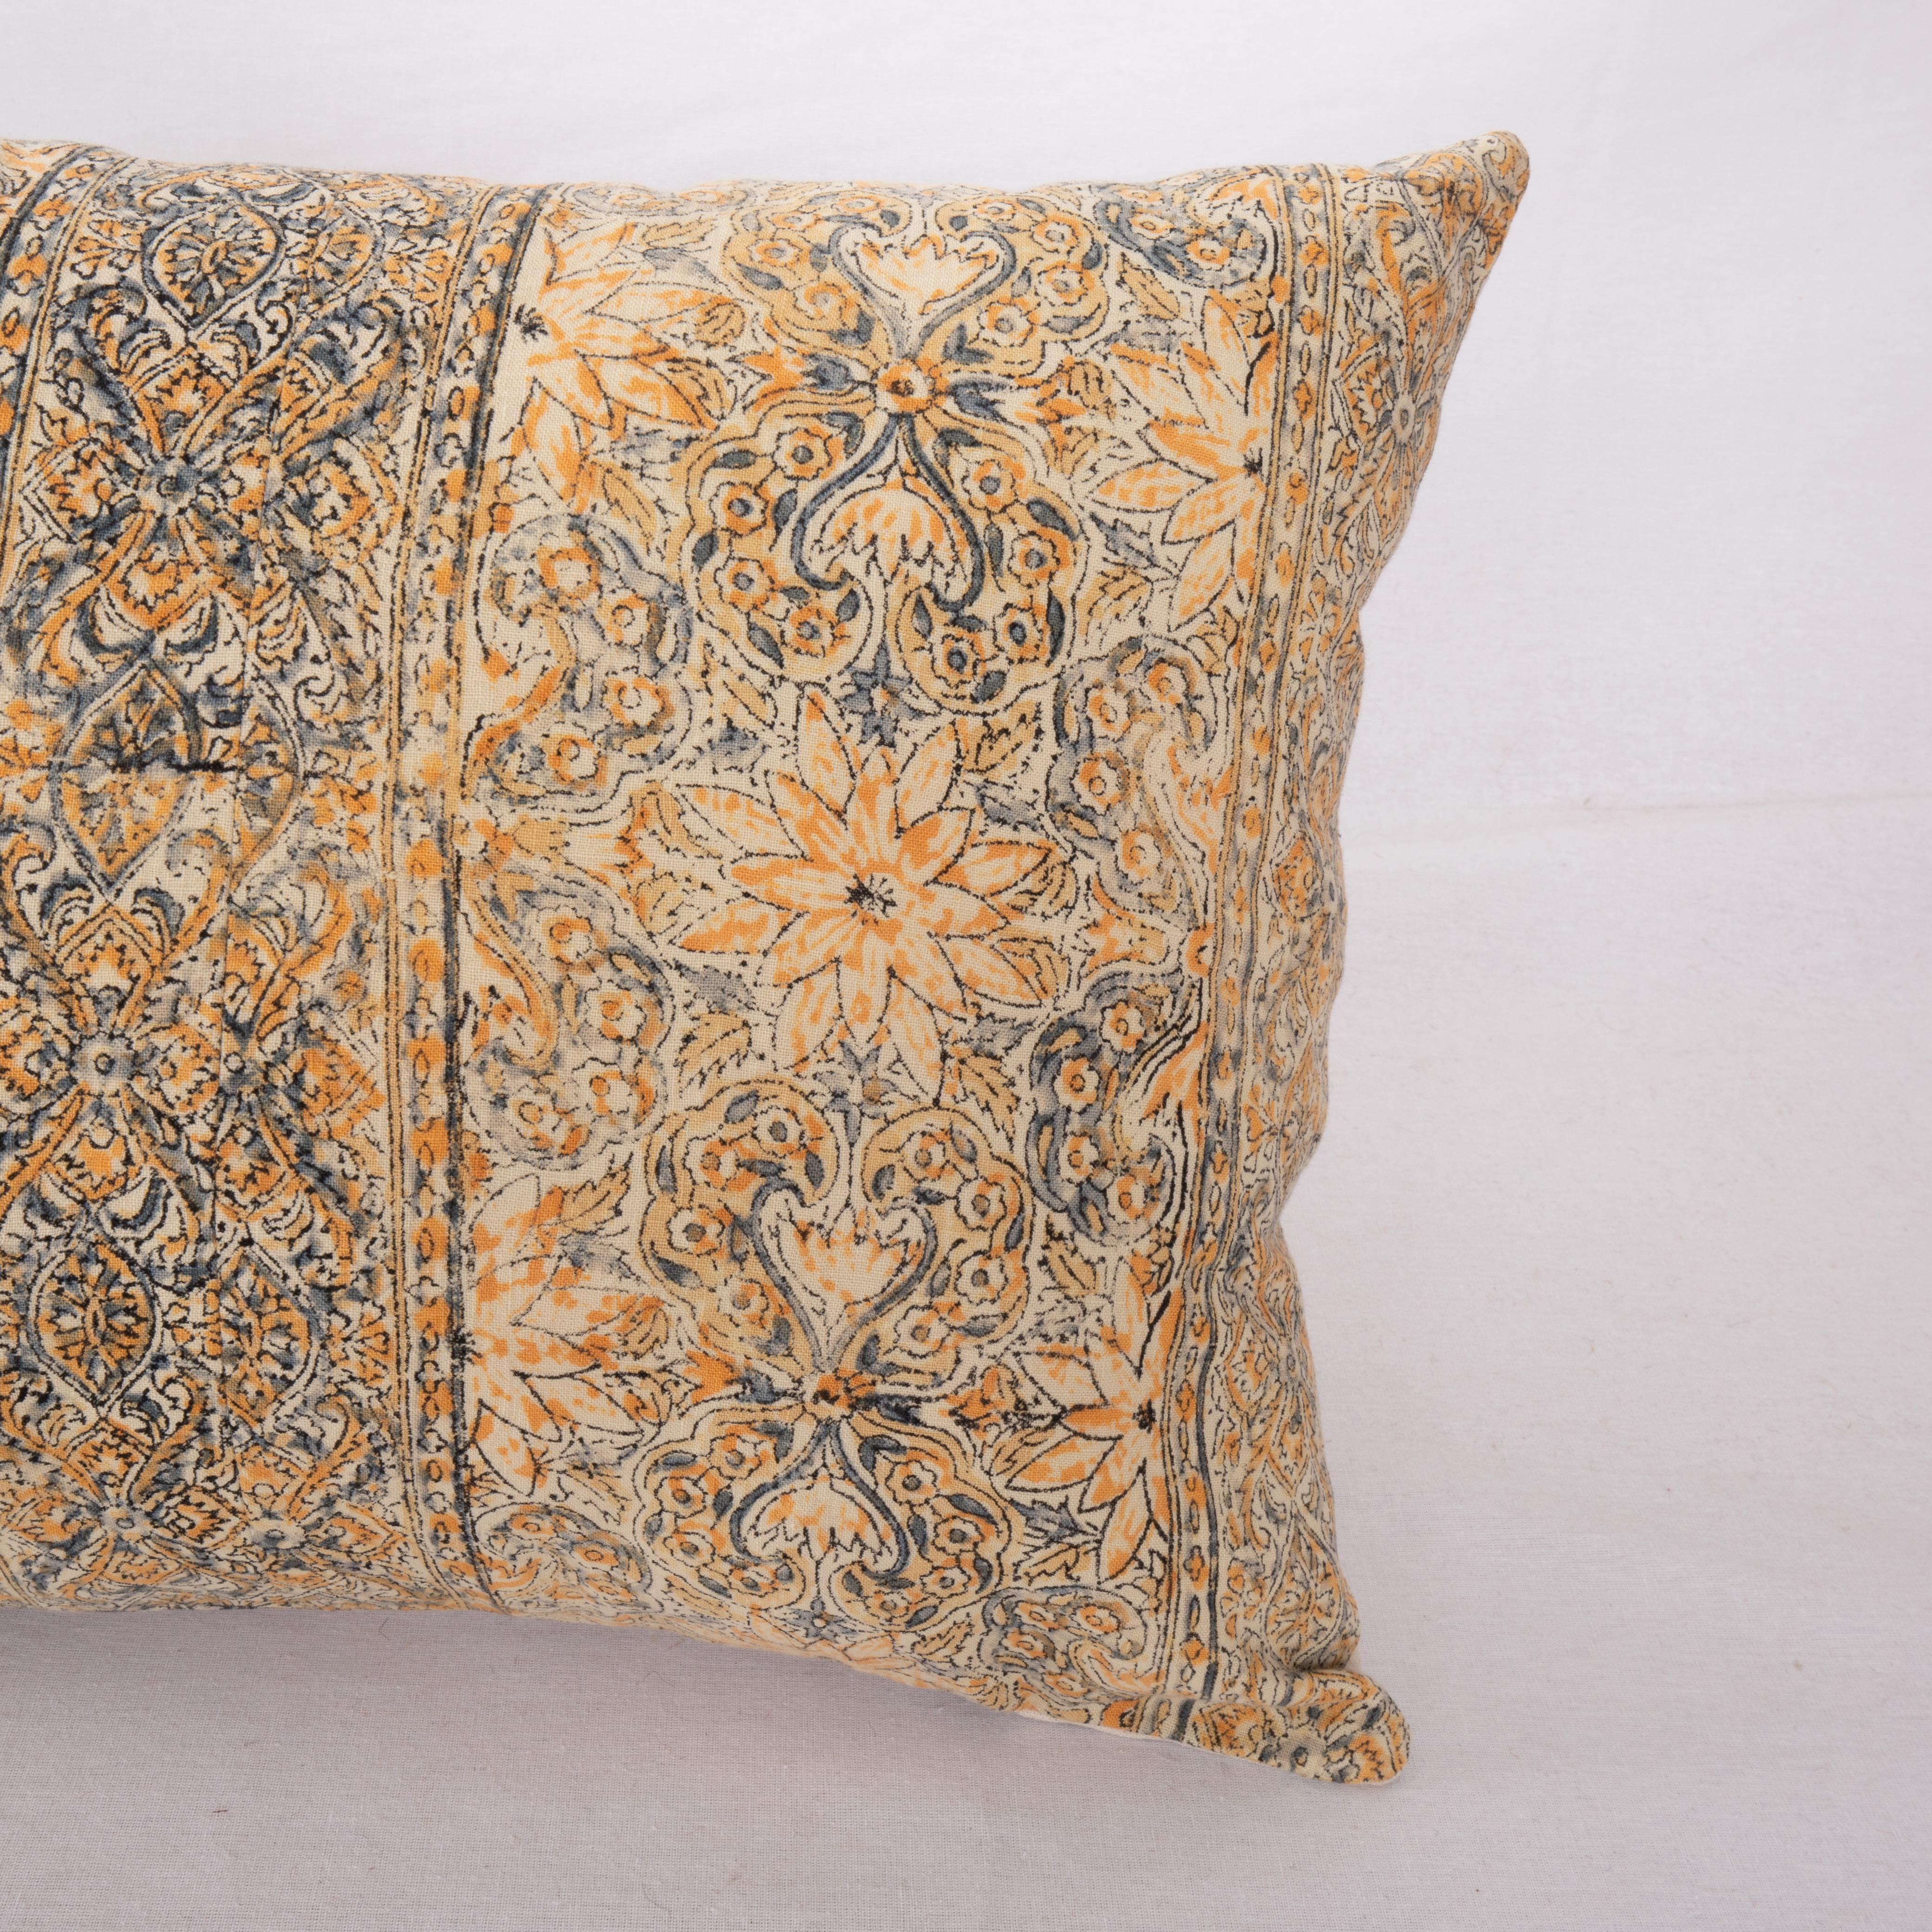 Folk Art Pillow Cover Made from a Vintage Indian Block Printed Textile For Sale